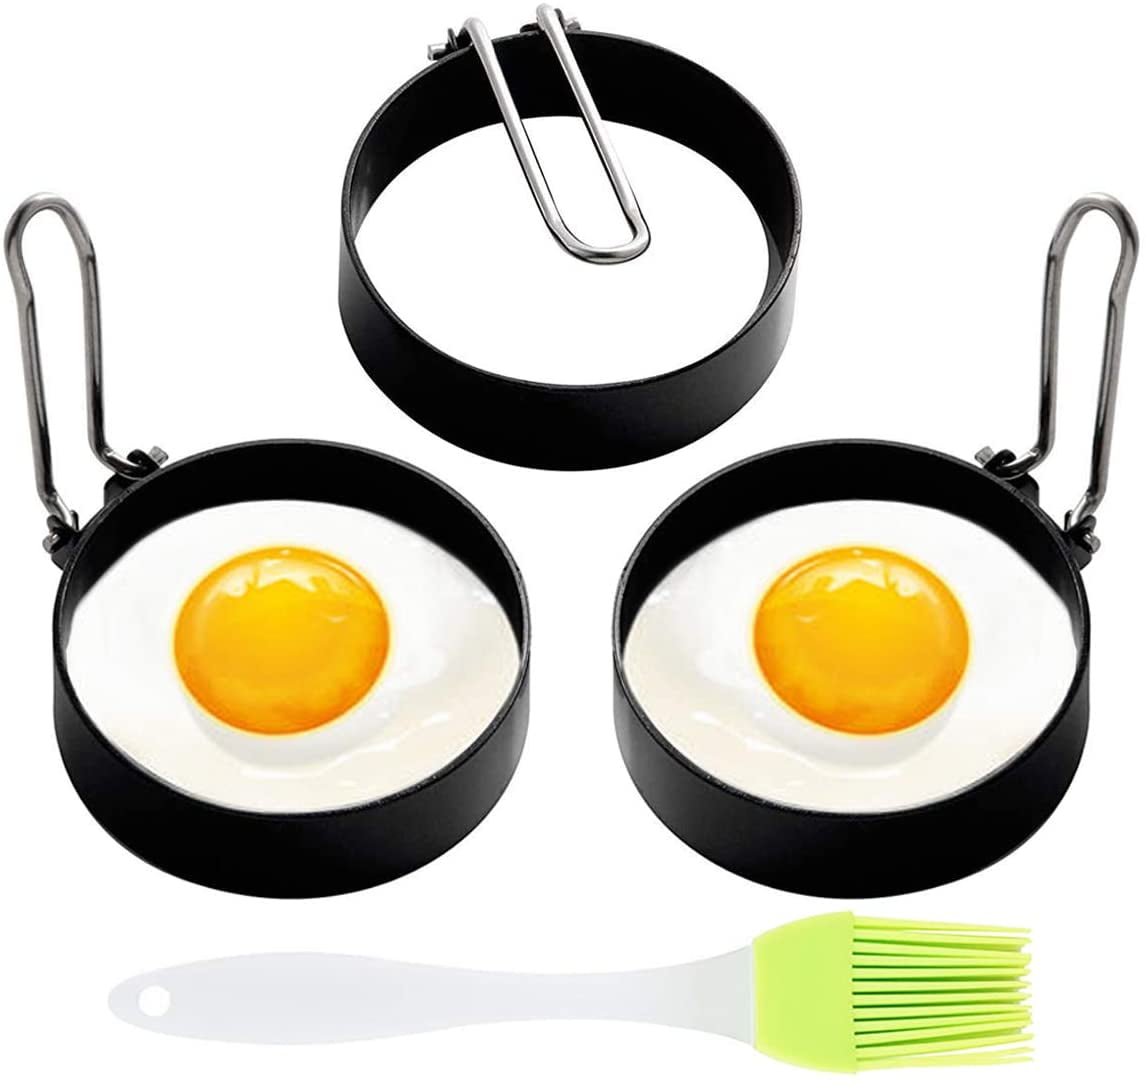 Egg Ring, 3 Pack Egg Pancake Maker Mold, Stainless Steel Non Stick Circle  Shaper Egg Rings, Kitchen Cooking Tool for Frying Egg Mcmuffin, Sandwiches